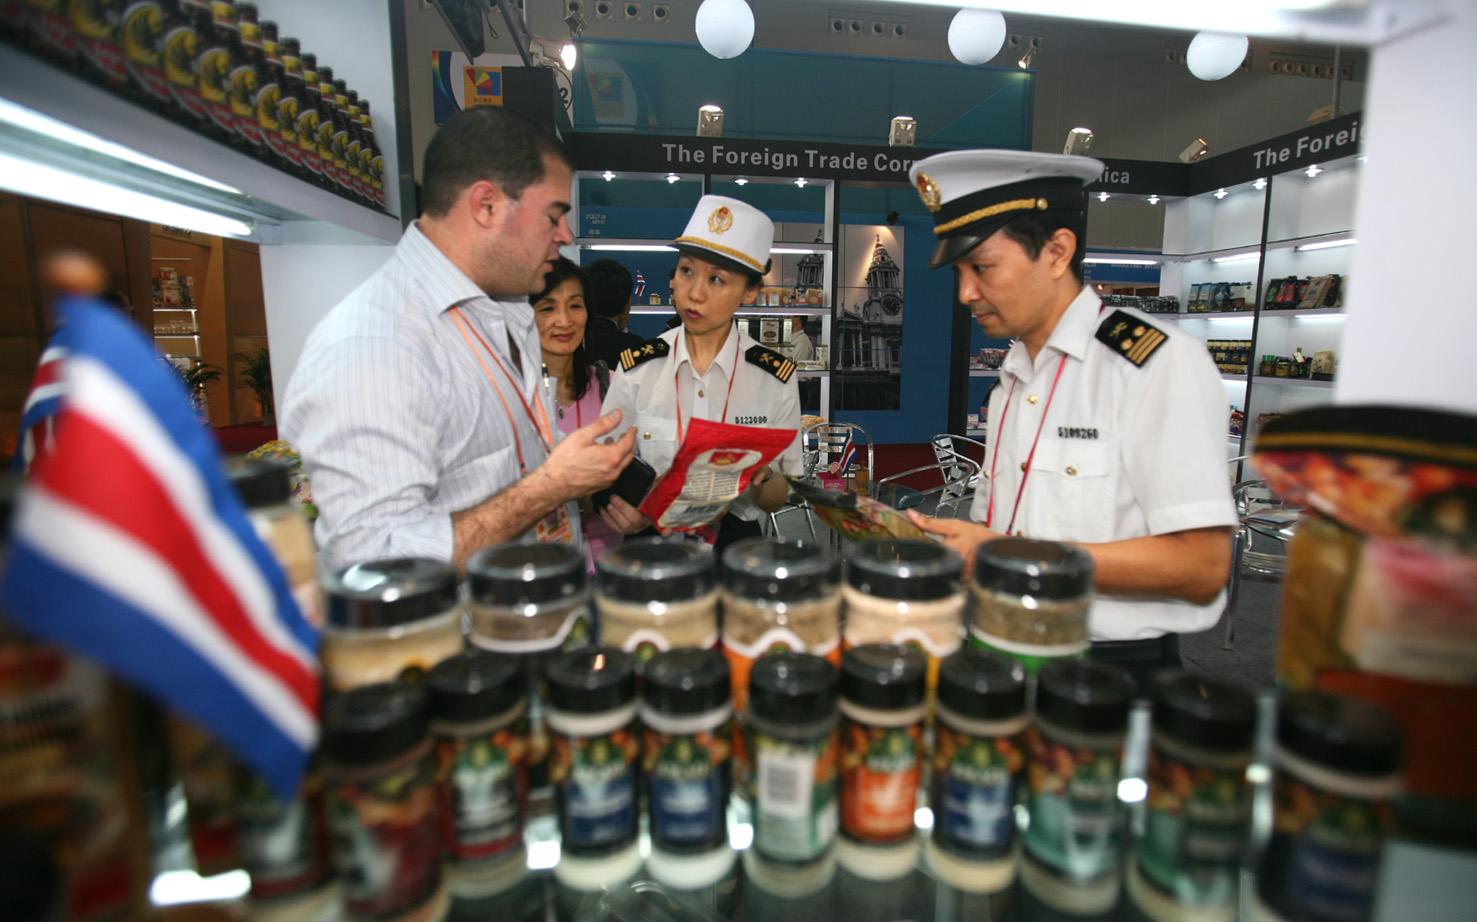 The Area of International Pavilion of the Canton Fair Doubled and High-Quality Services Provided by Customs Were Praised